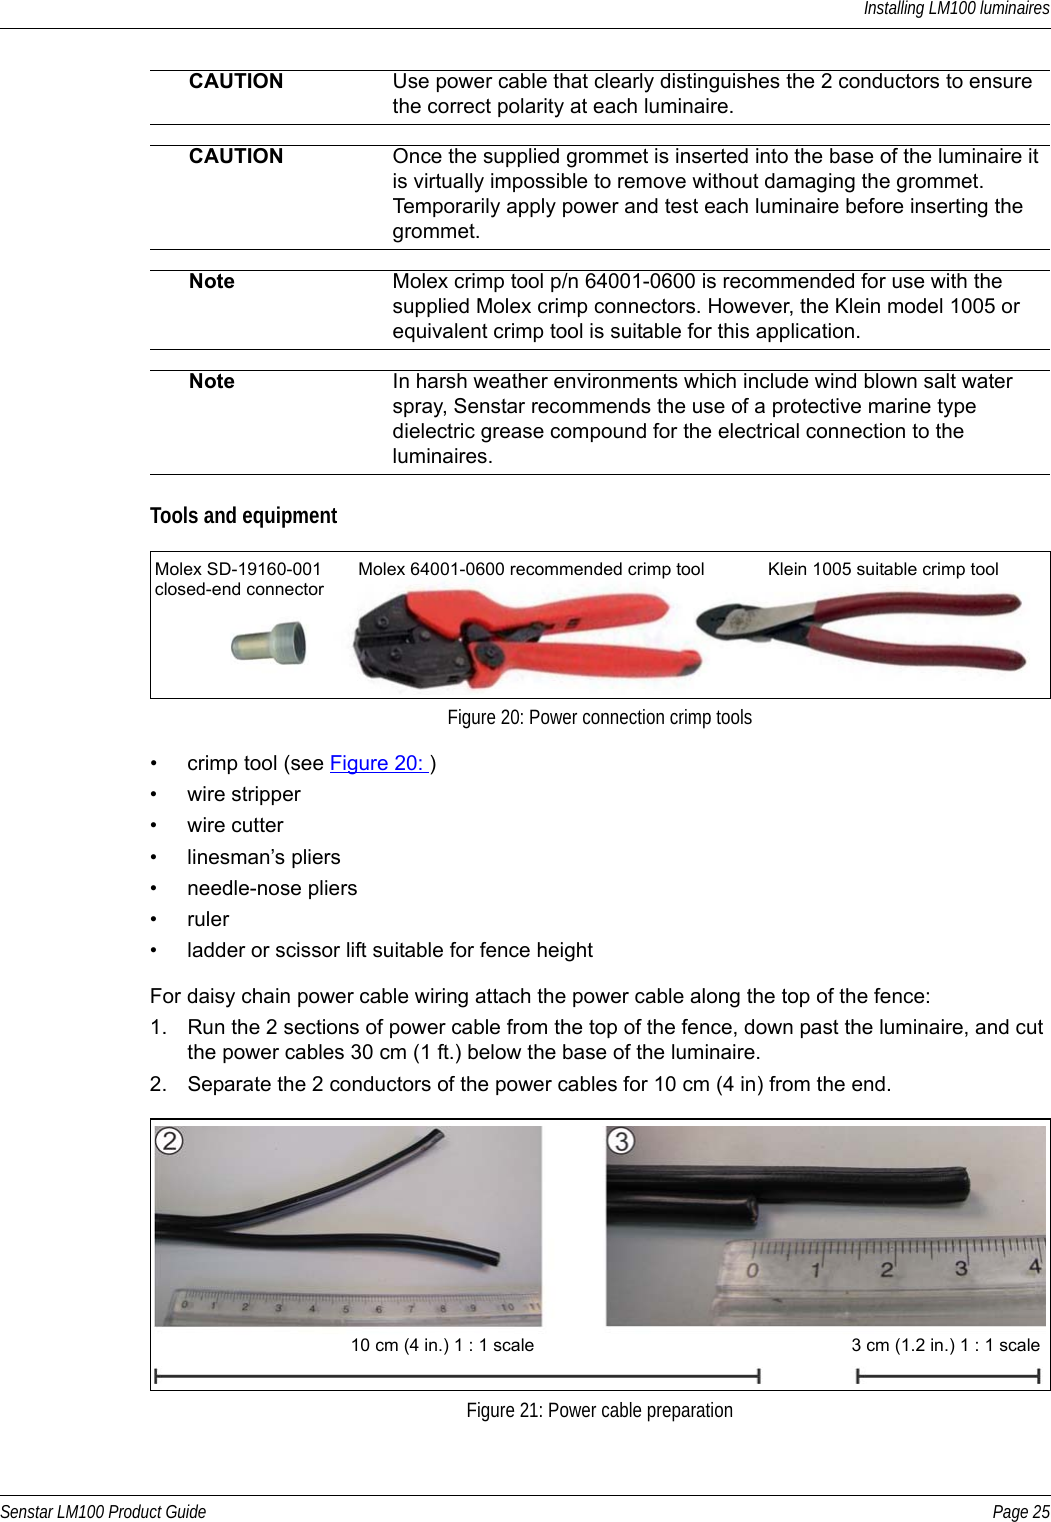 Installing LM100 luminairesSenstar LM100 Product Guide Page 25Tools and equipment• crimp tool (see Figure 20: )• wire stripper• wire cutter• linesman’s pliers• needle-nose pliers• ruler• ladder or scissor lift suitable for fence heightFor daisy chain power cable wiring attach the power cable along the top of the fence:1. Run the 2 sections of power cable from the top of the fence, down past the luminaire, and cut the power cables 30 cm (1 ft.) below the base of the luminaire.2. Separate the 2 conductors of the power cables for 10 cm (4 in) from the end.CAUTION Use power cable that clearly distinguishes the 2 conductors to ensure the correct polarity at each luminaire.CAUTION Once the supplied grommet is inserted into the base of the luminaire it is virtually impossible to remove without damaging the grommet. Temporarily apply power and test each luminaire before inserting the grommet.Note Molex crimp tool p/n 64001-0600 is recommended for use with the supplied Molex crimp connectors. However, the Klein model 1005 or equivalent crimp tool is suitable for this application.Note In harsh weather environments which include wind blown salt water spray, Senstar recommends the use of a protective marine type dielectric grease compound for the electrical connection to the luminaires.Figure 20: Power connection crimp toolsFigure 21: Power cable preparationMolex SD-19160-001closed-end connectorMolex 64001-0600 recommended crimp tool Klein 1005 suitable crimp tool10 cm (4 in.) 1 : 1 scale 3 cm (1.2 in.) 1 : 1 scale